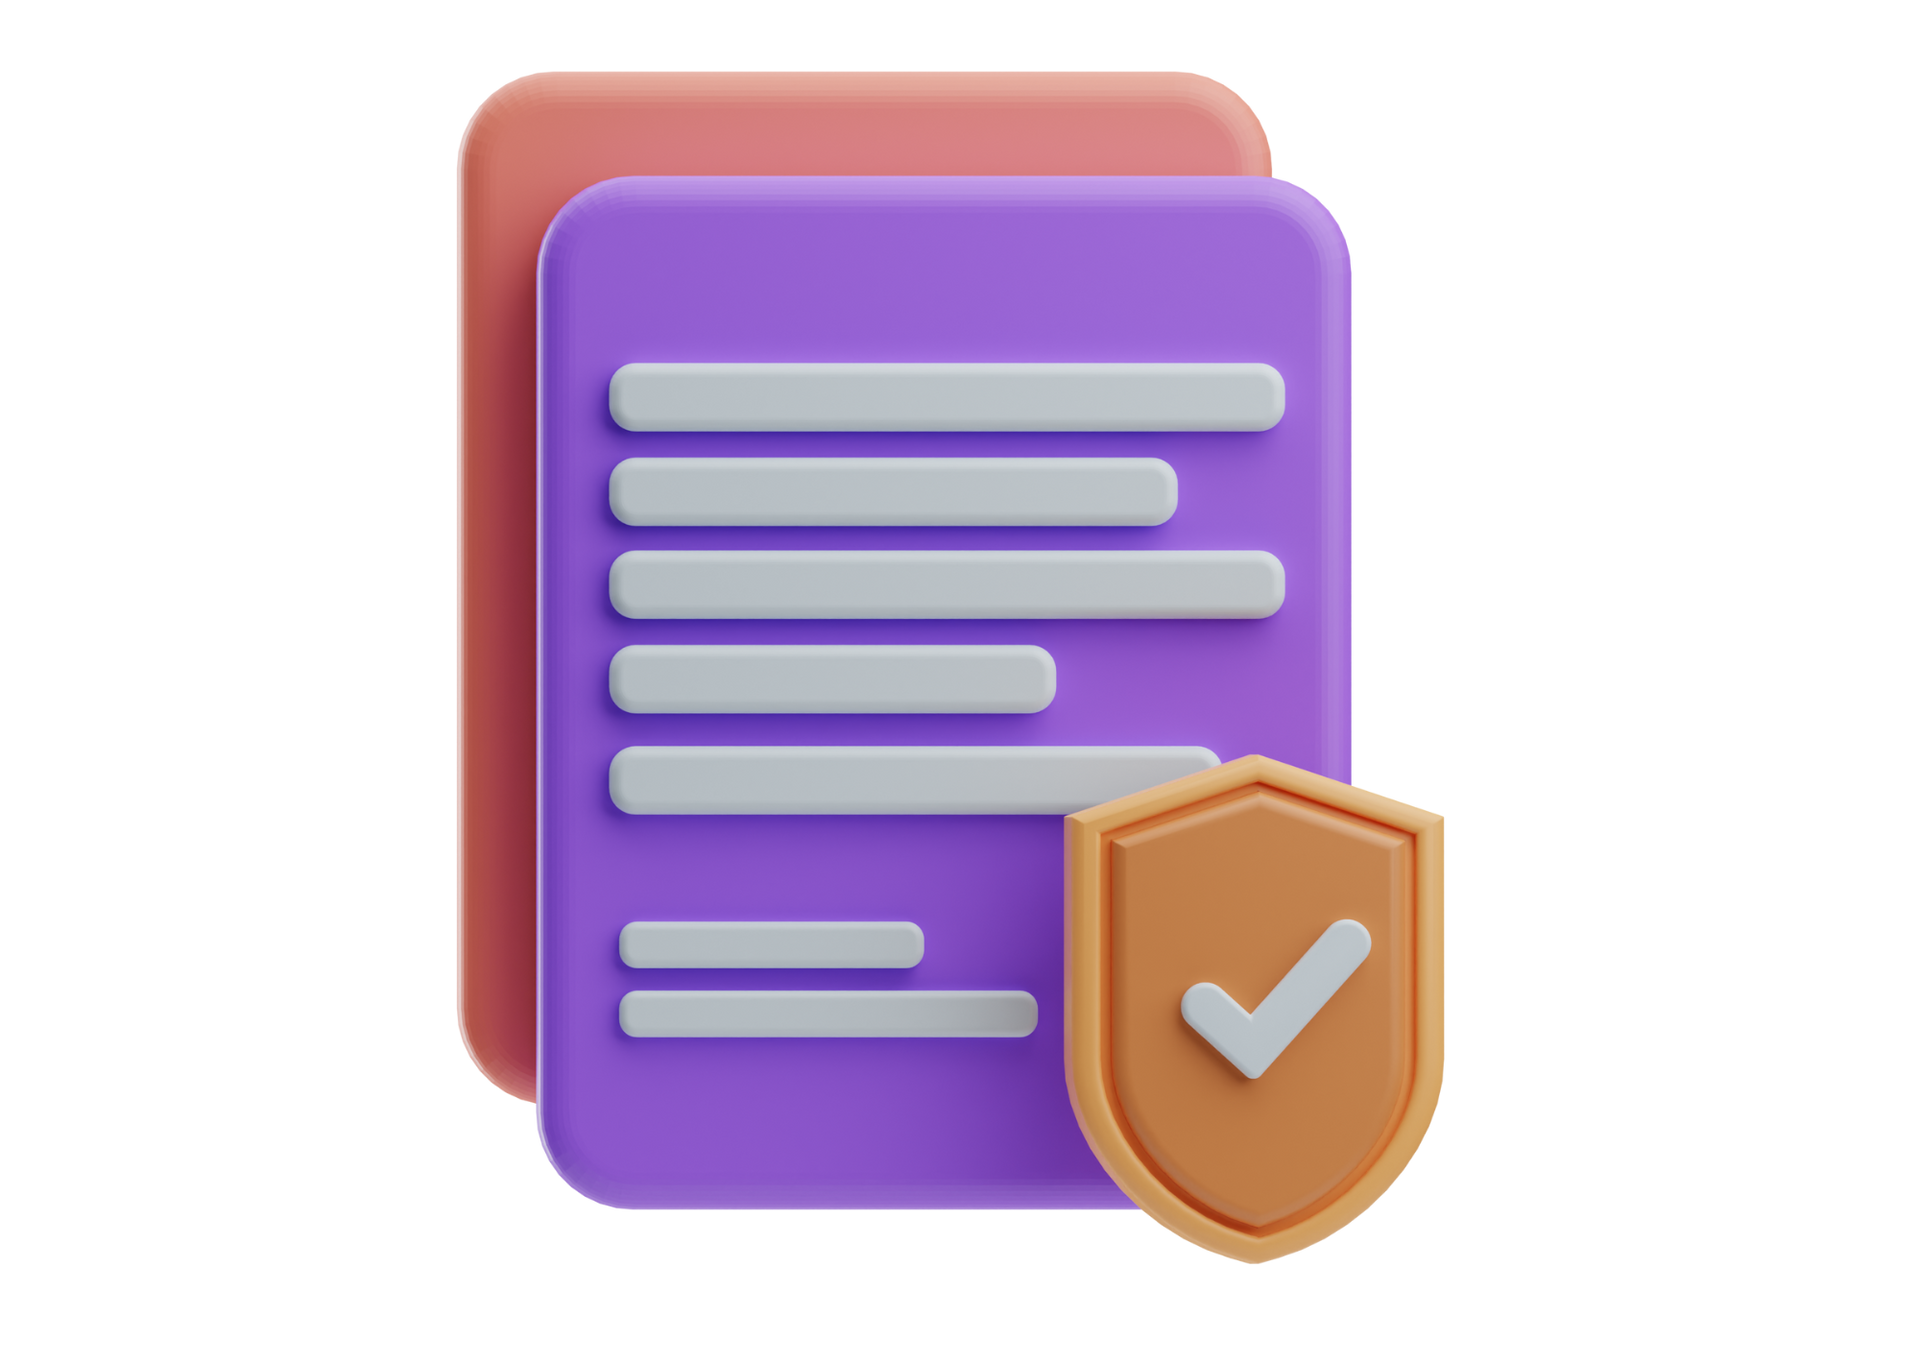 A 3d illustration of a purple document with a shield and a check mark.